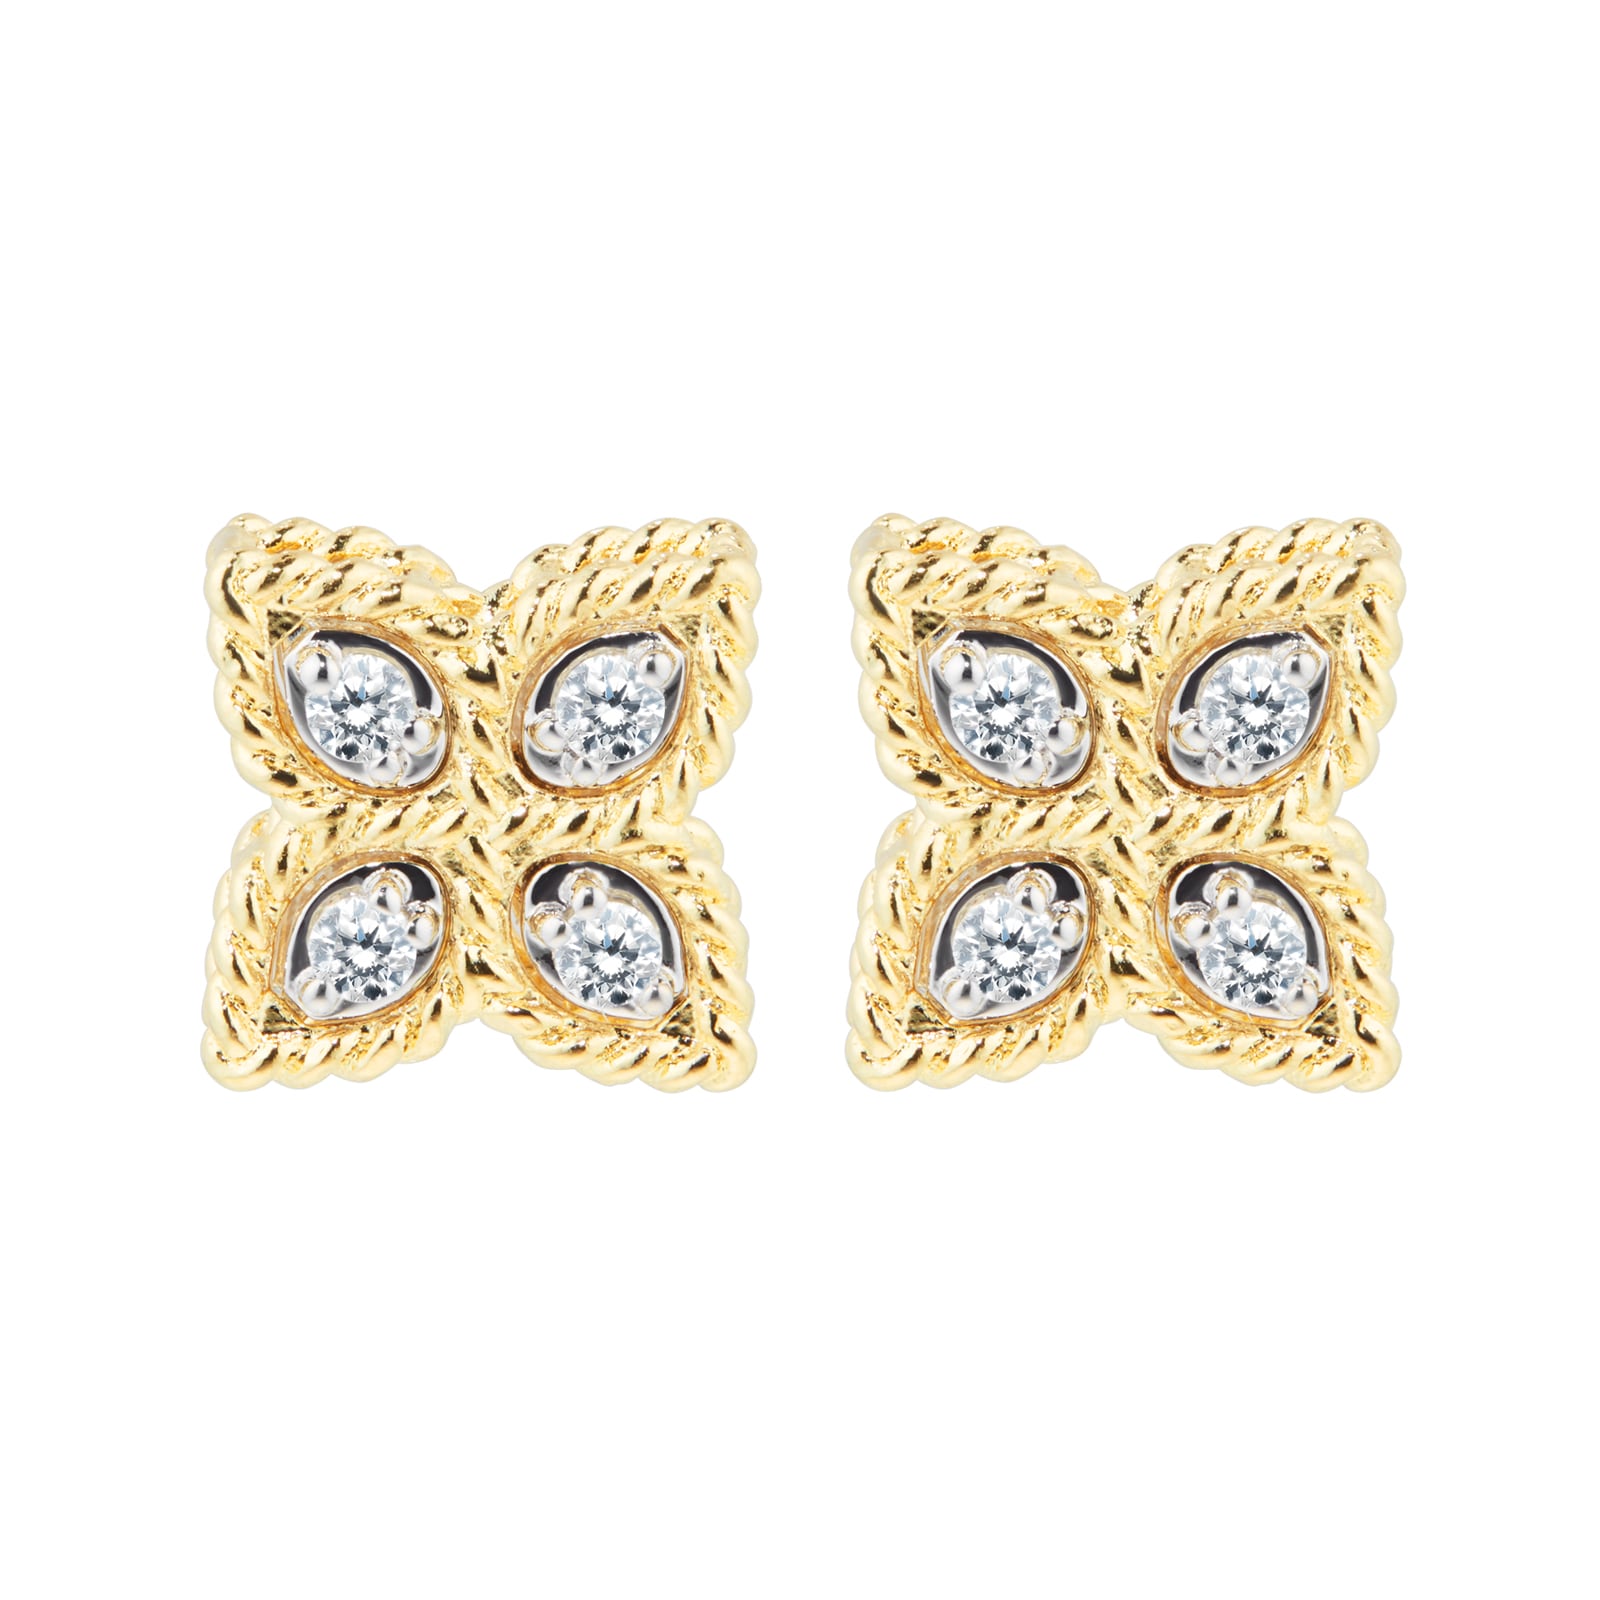 Princess Flower 18ct Yellow and White Gold 0.096ct Diamond Stud Earrings